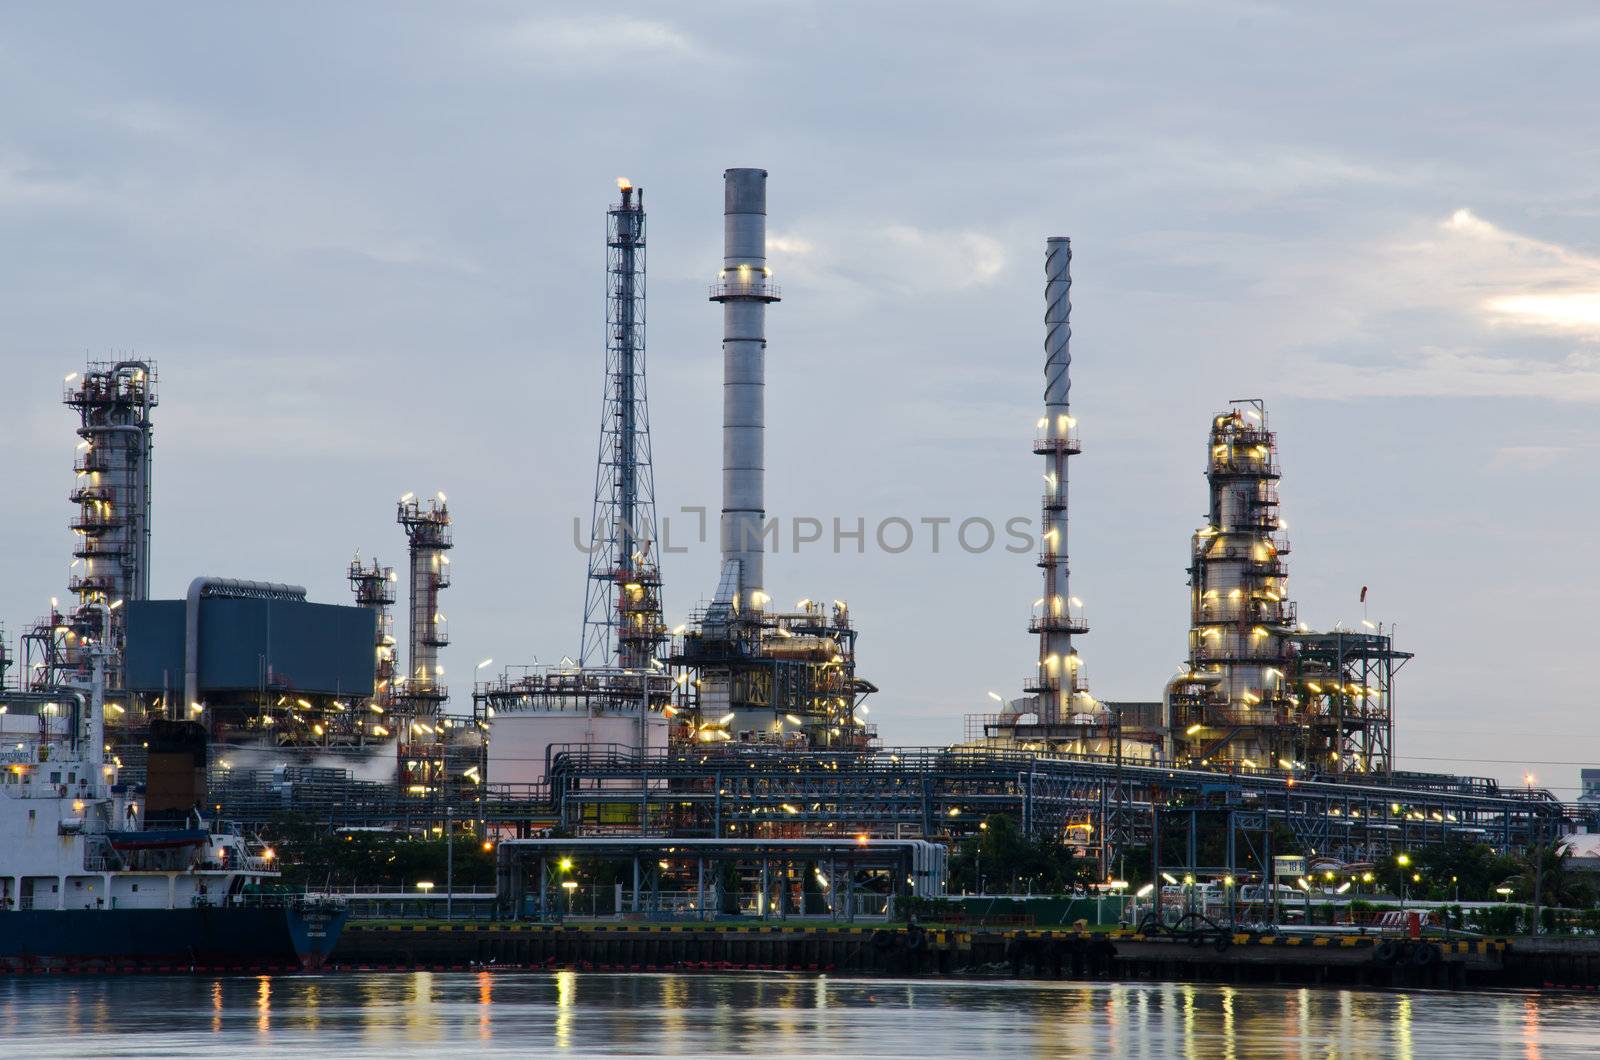 Oil refinery plant in the dawn, Chao Phraya river, Thailand